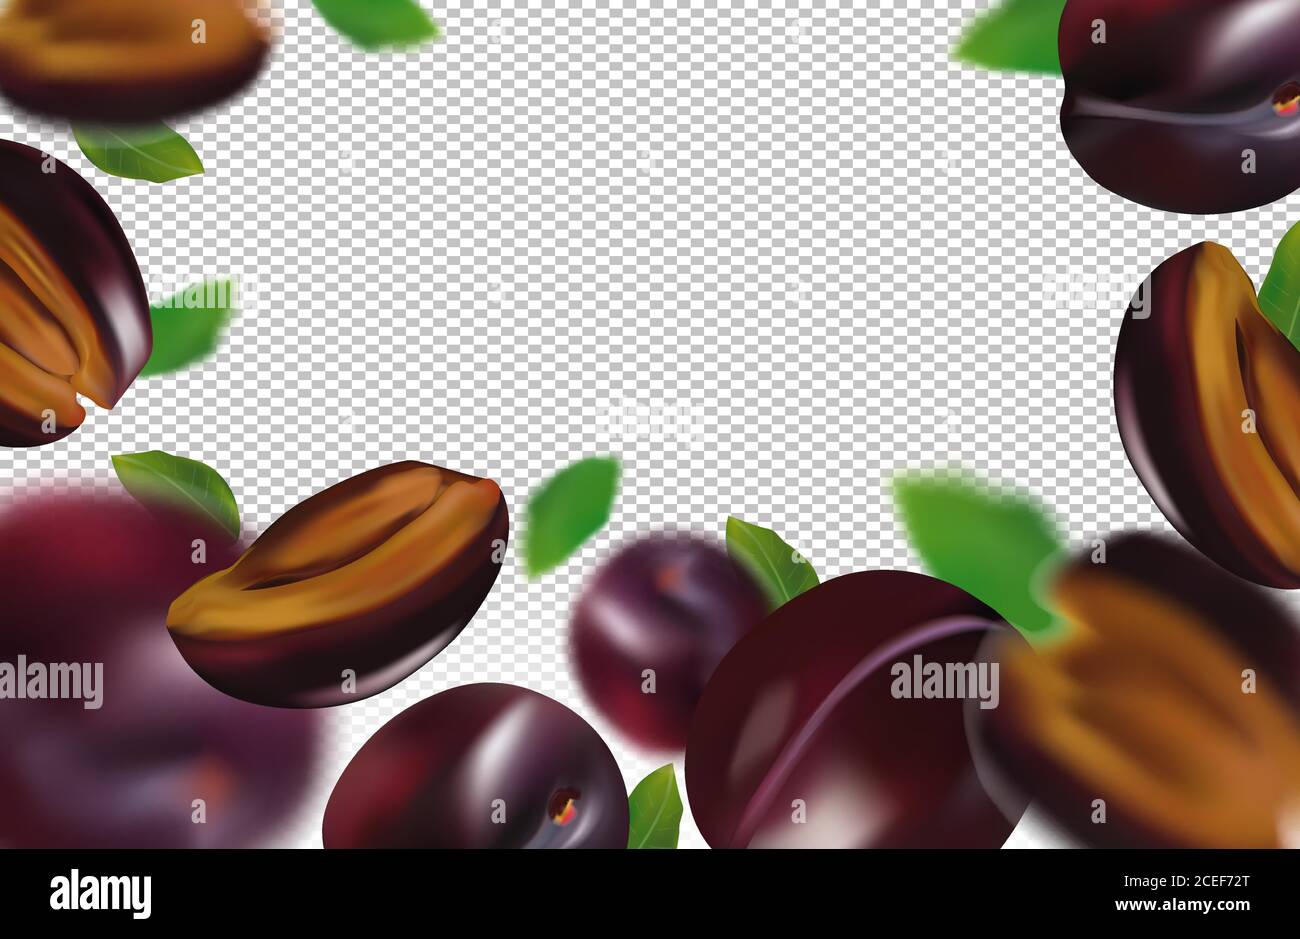 Realistic plum on transparent background. Whole plum, sliced plum with green leaves. Illustration for your poster, banner, natural product. 3D vector illustration. Stock Vector